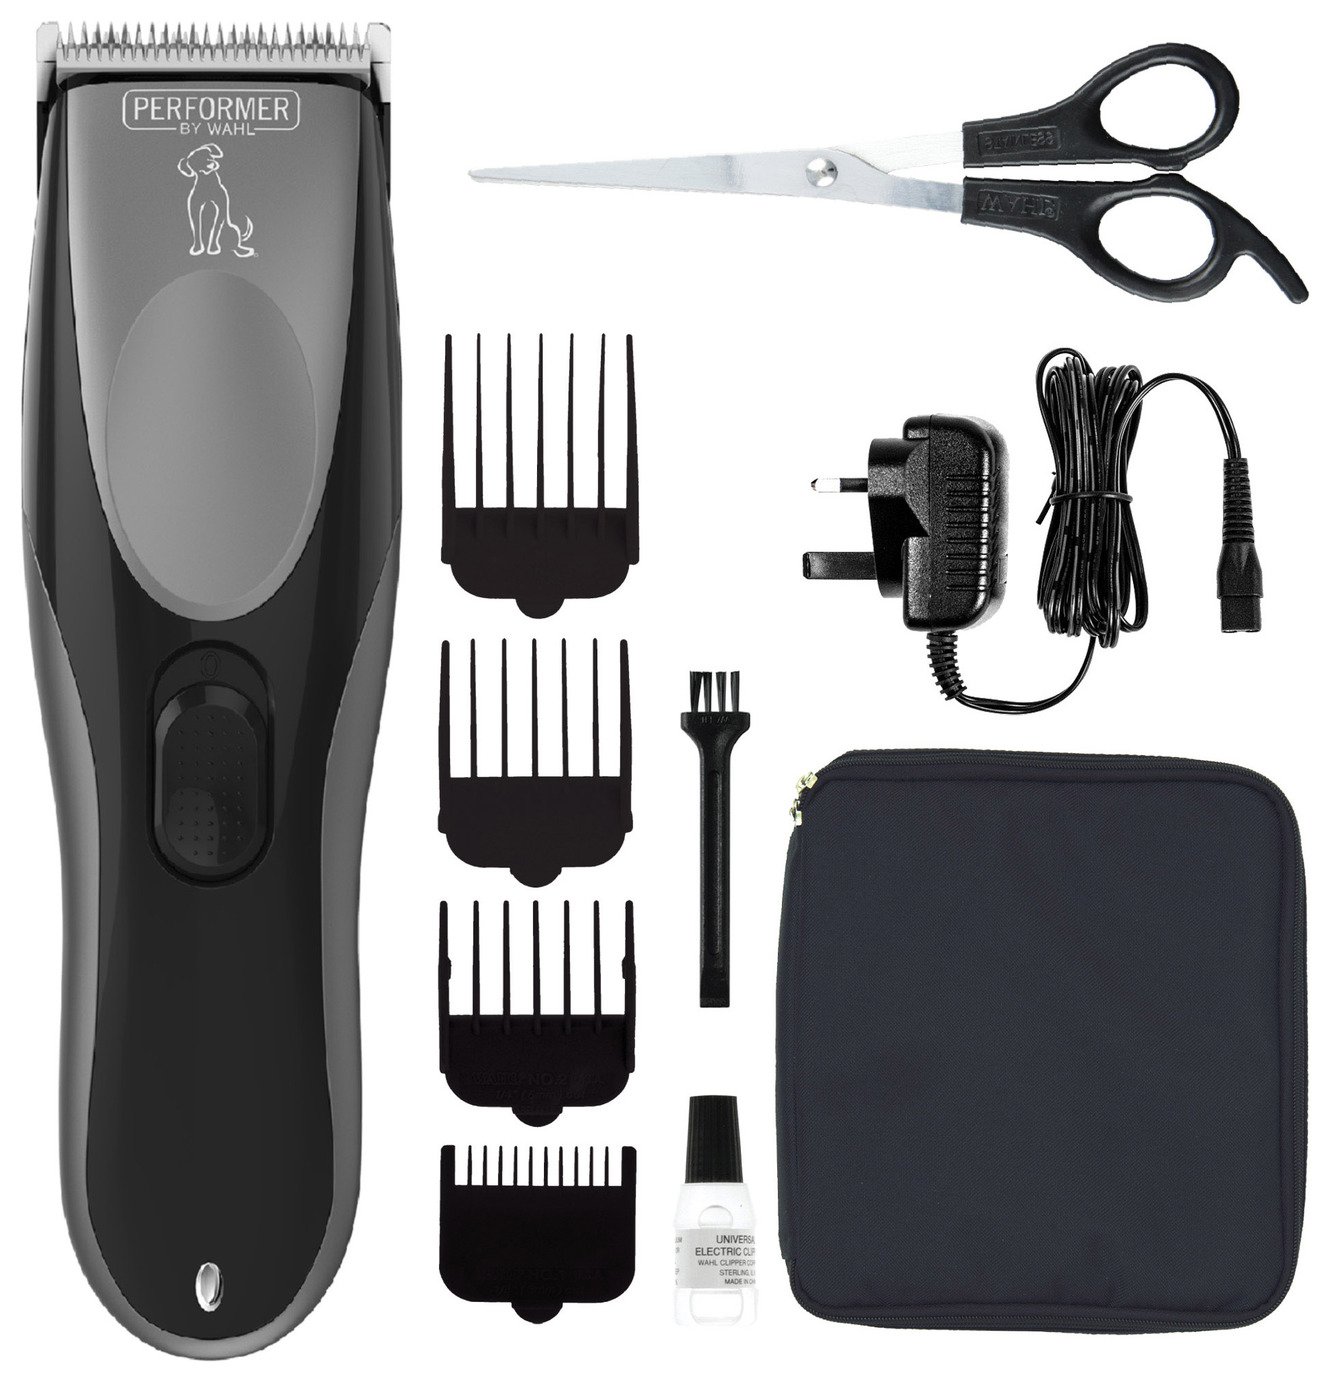 WAHL Performer Cord Cordless Pet Clipper, Dog Clippers, Cordless Dog Grooming Kit, Pet Hair Trimmer Set, Low Noise and Vibration, Grooming Pets at Hom